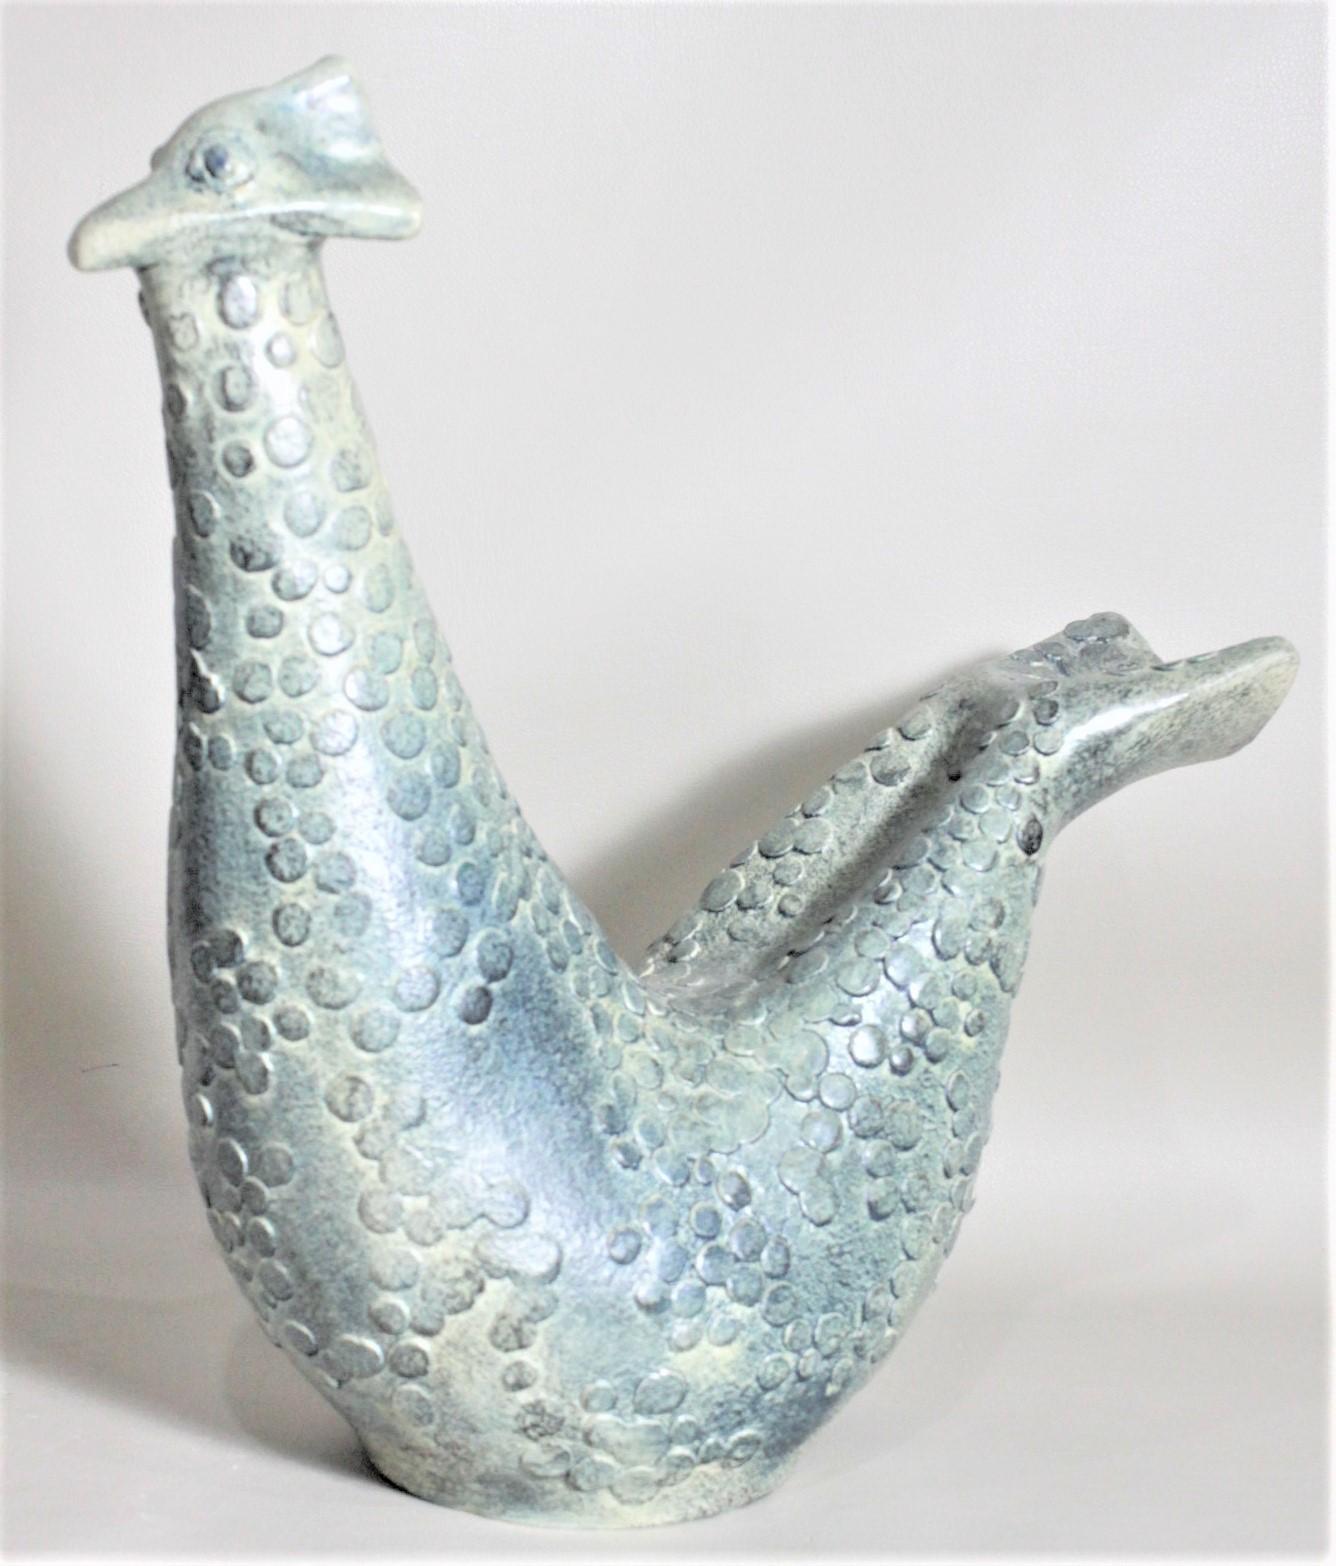 This unique and whimsical pottery bird sculpture was made by Theo and Susan Harlander of the Brooklin Pottery company of Canada in approximately 1965 in the period Mid-Century Modern style. The sculpture is a seated stylized bird with a whimsical